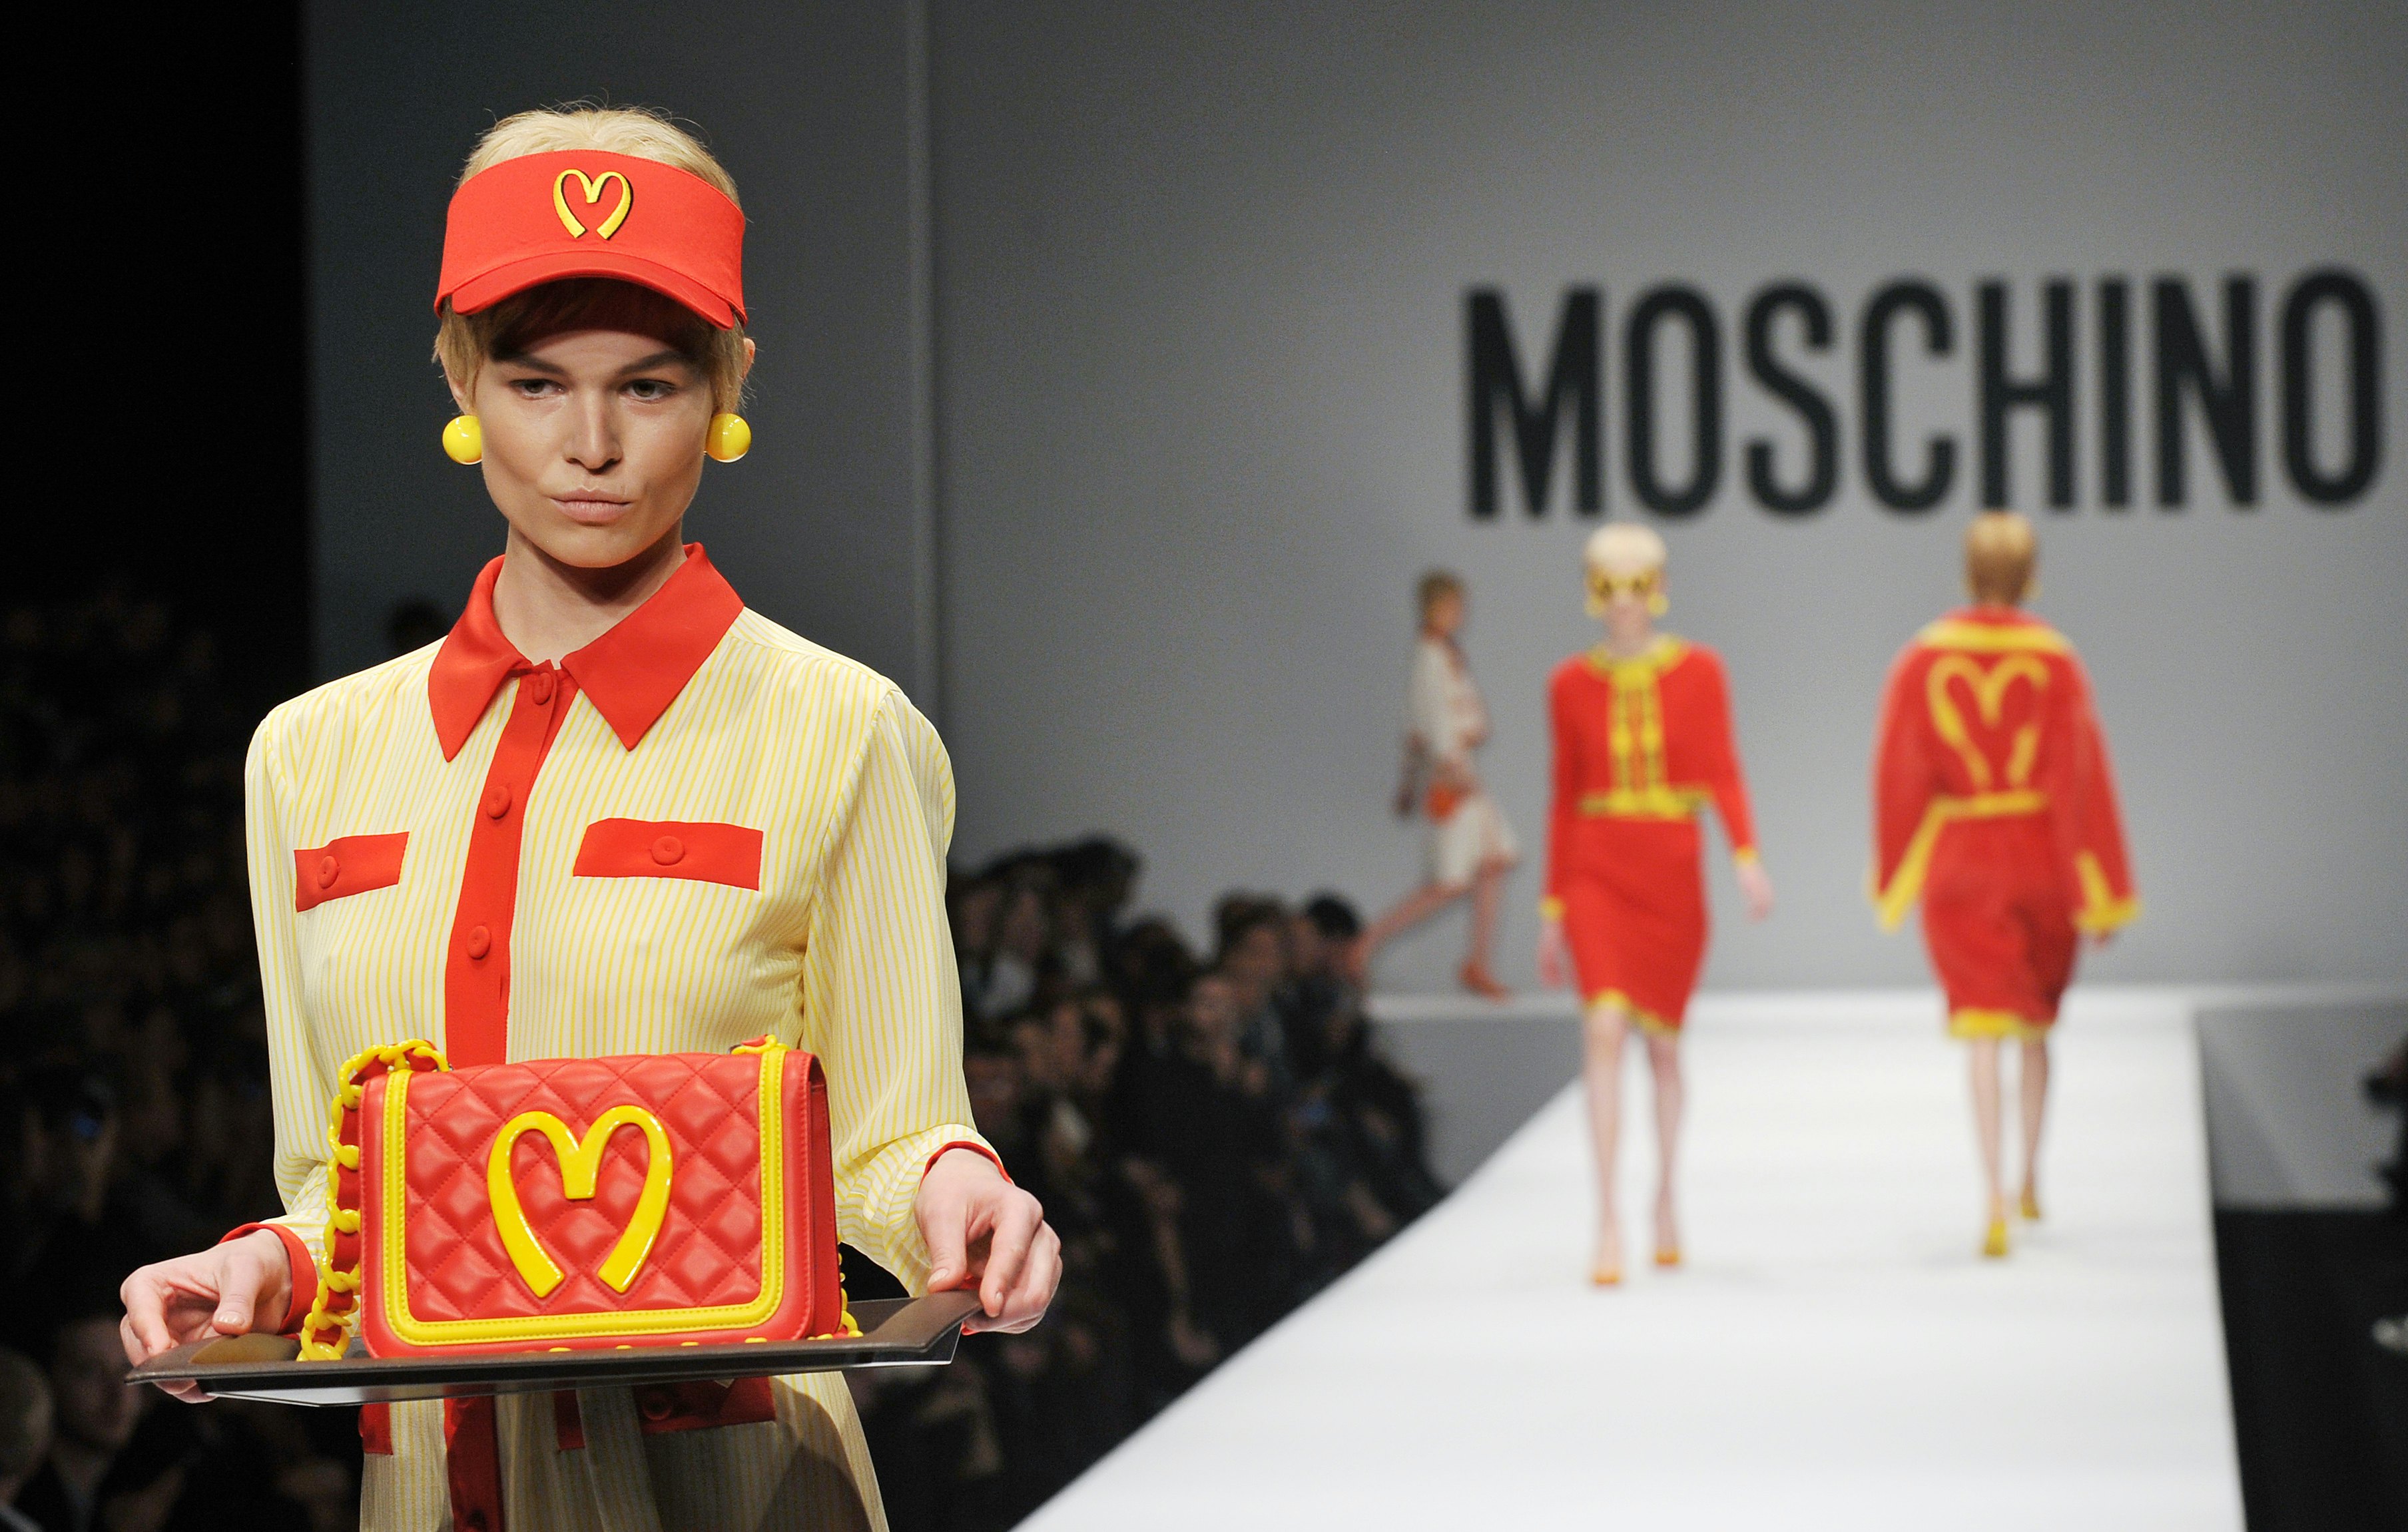 moschino target clothes